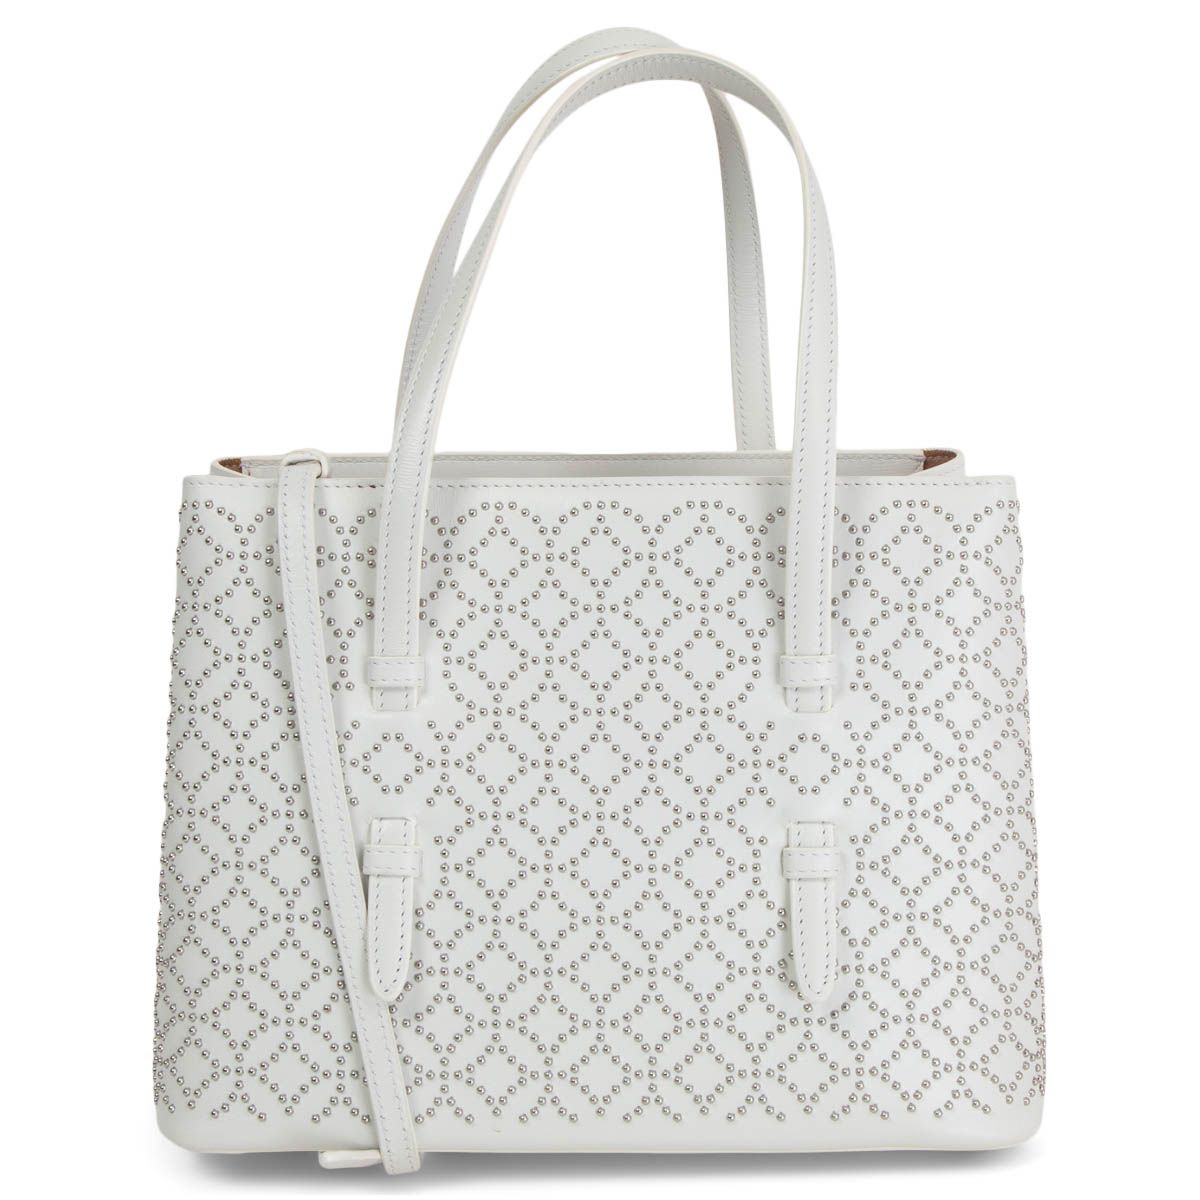 audit Cornwall bay Alaia Vienne Studded Mini Tote Bag White Leather